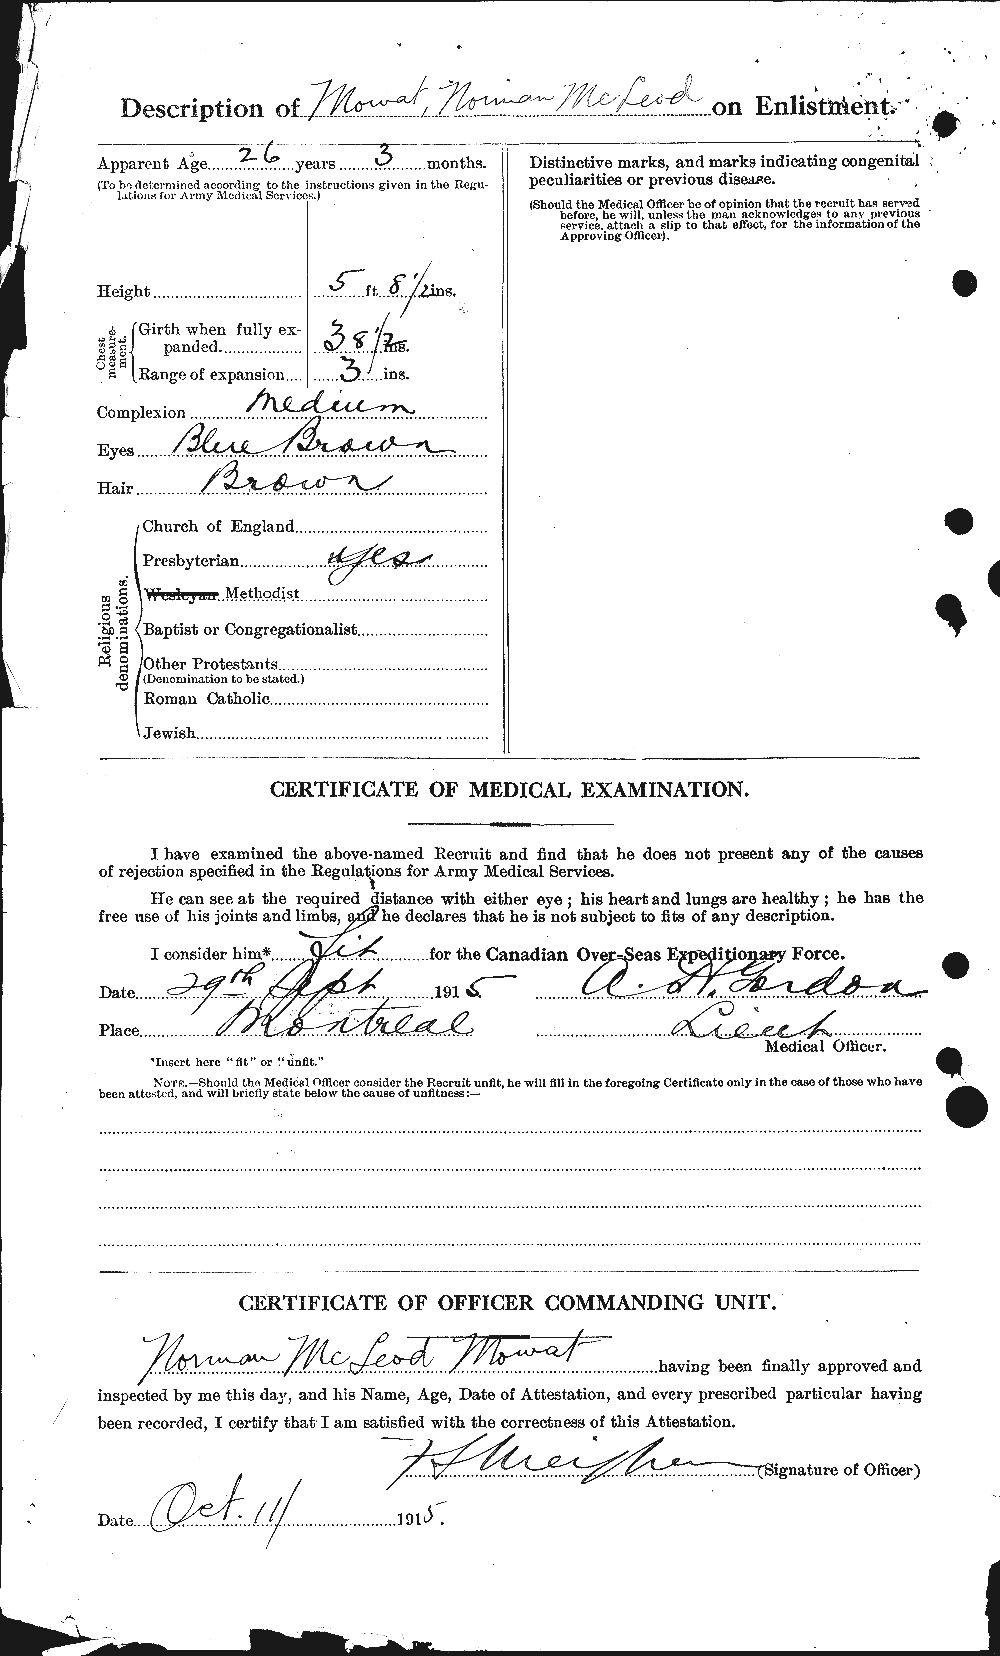 Personnel Records of the First World War - CEF 510457b